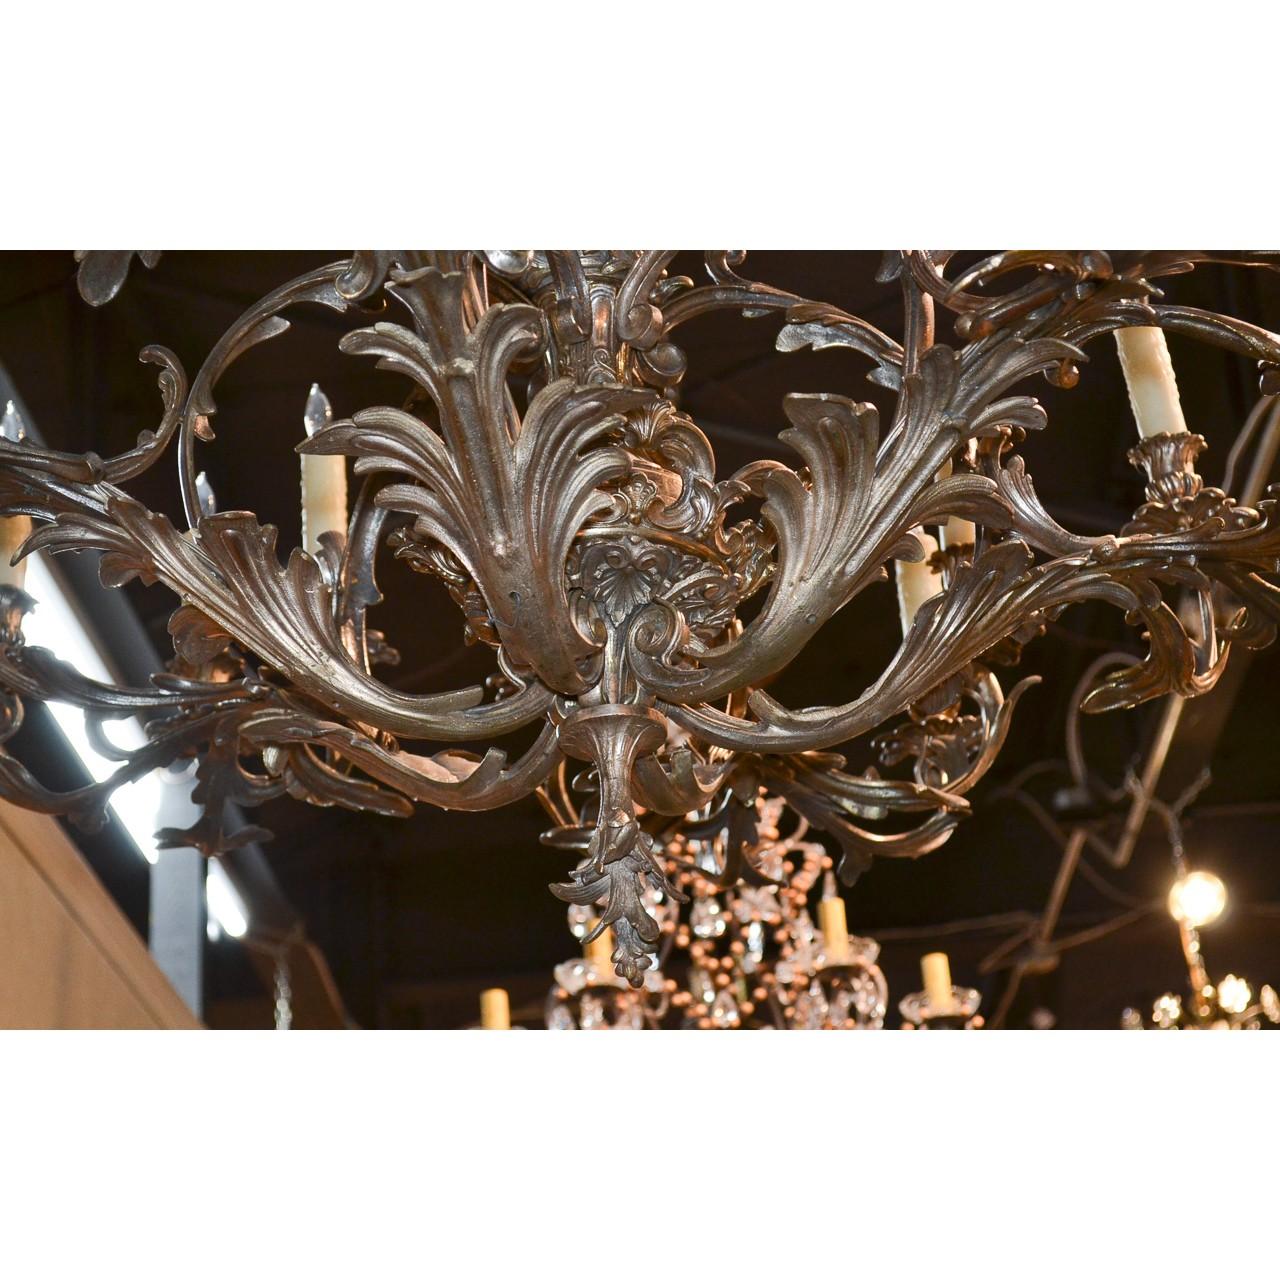 Very fine quality and magnificently crafted 19th century French Rococo style silver on bronze chandelier, ornately decorated overall with boldly scrolled acanthus leaves, flower clusters, and caryatid busts. The centre stem adorned with a tapered